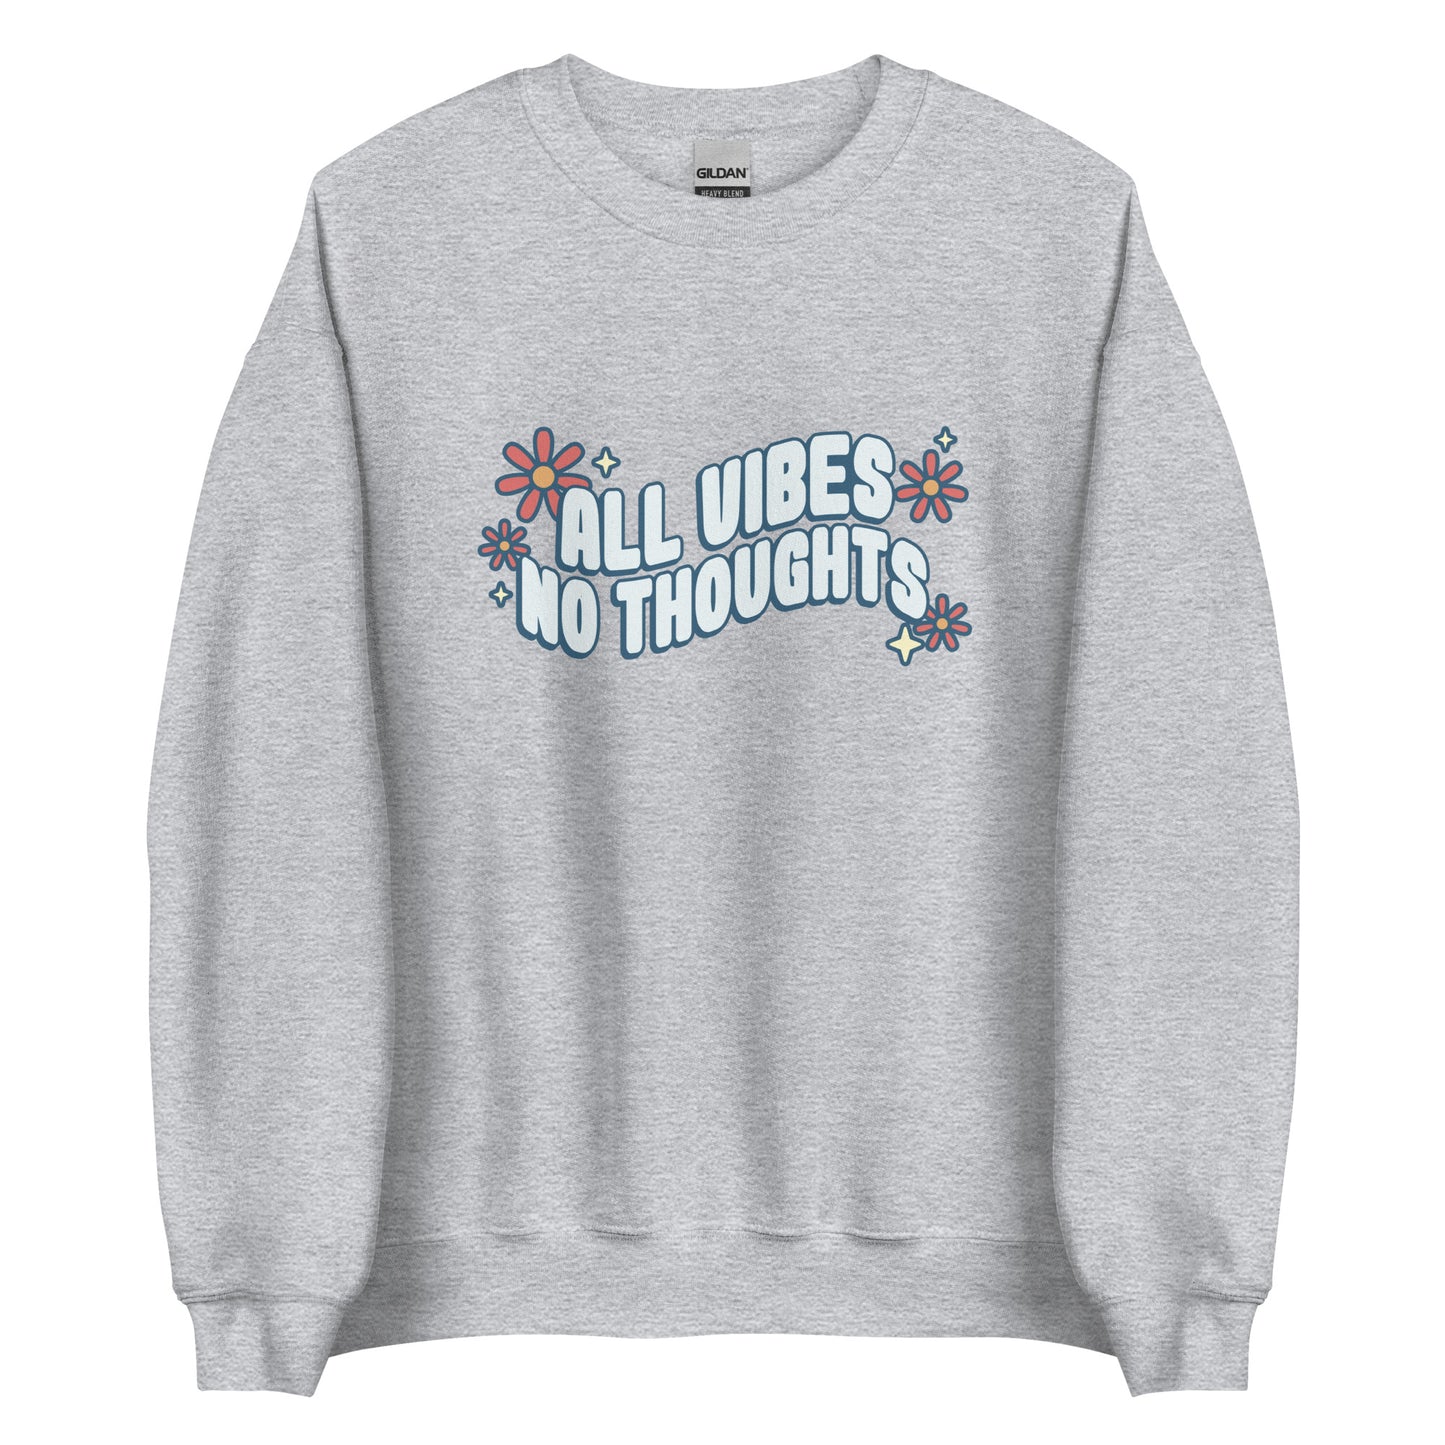 A light grey crewneck sweatshirt featuring text that reads "All vibes, no thoughts". Around the text are a few pink flowers and pale yellow sparkles.